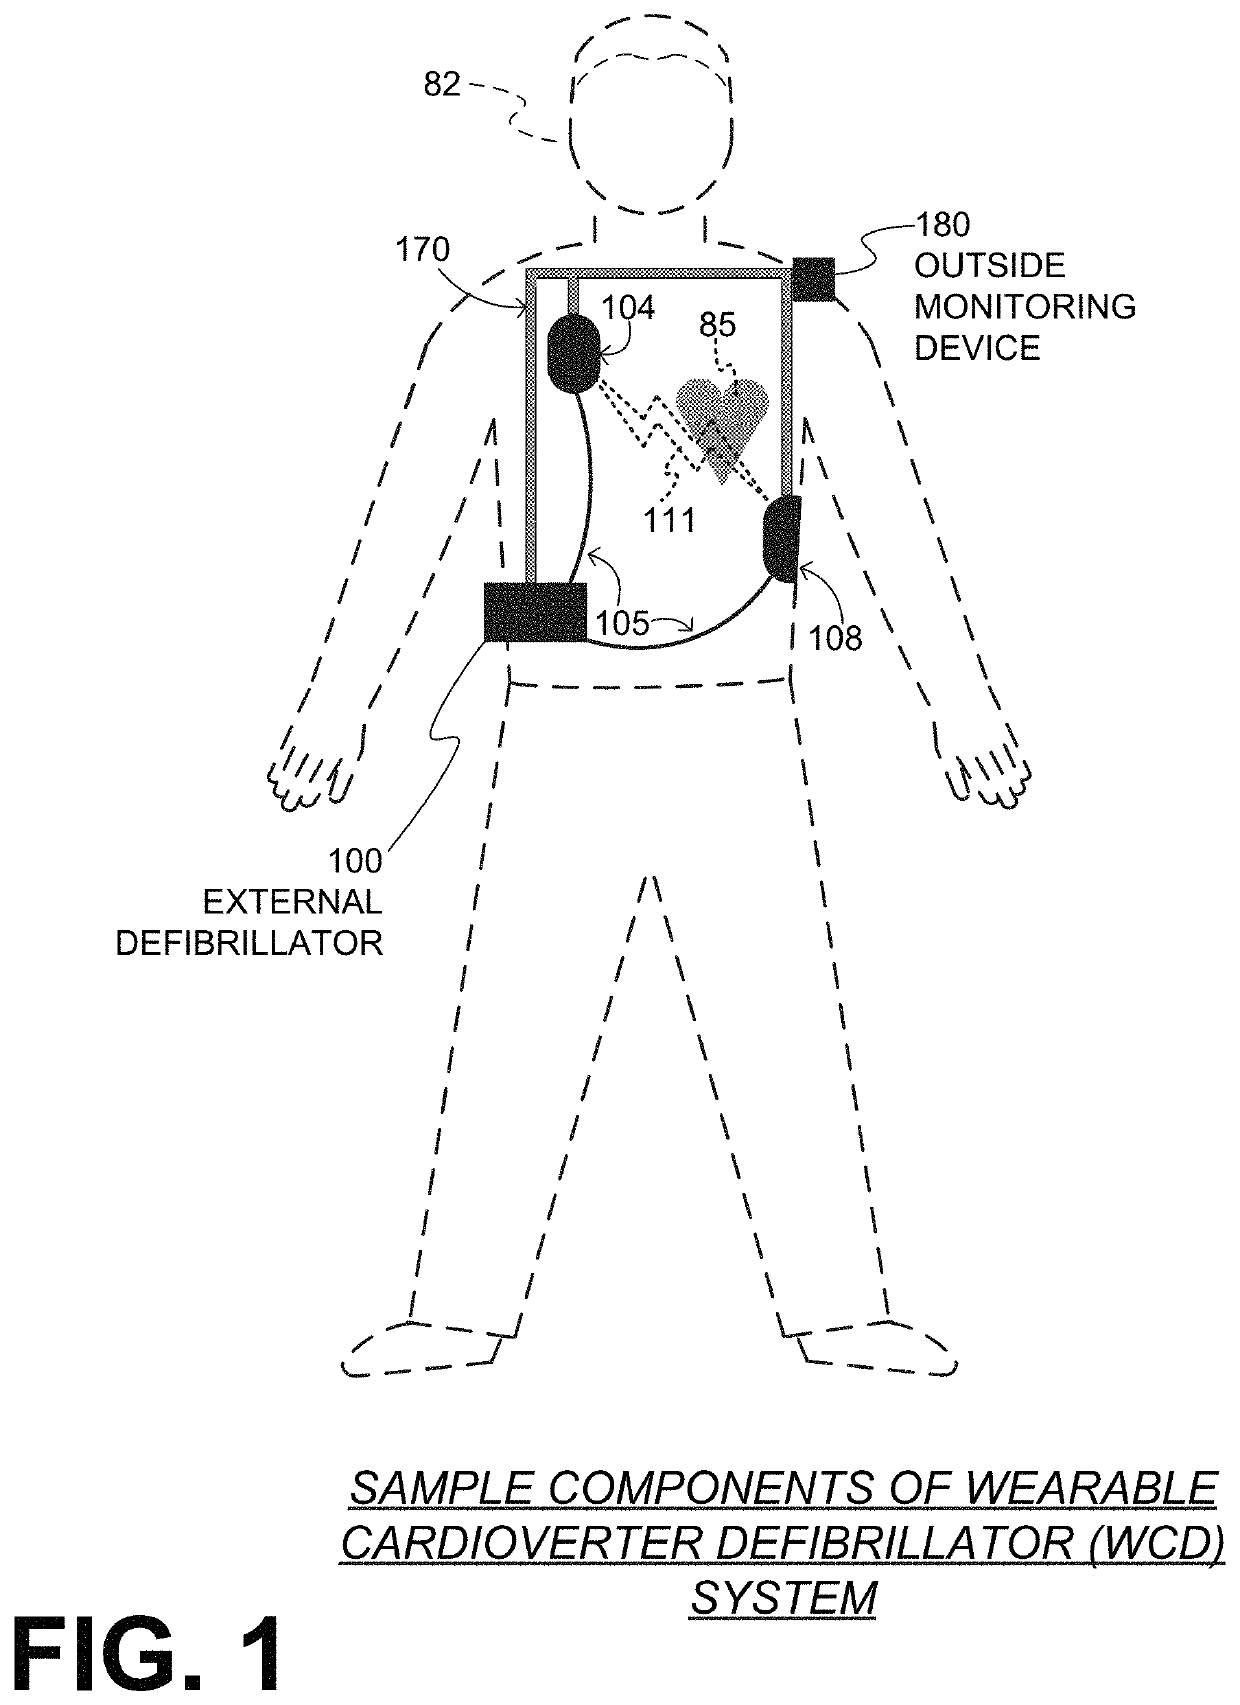 Wearable cardioverter defibrillator (WCD) system detecting QRS complexes in ECG signal by matched difference filter